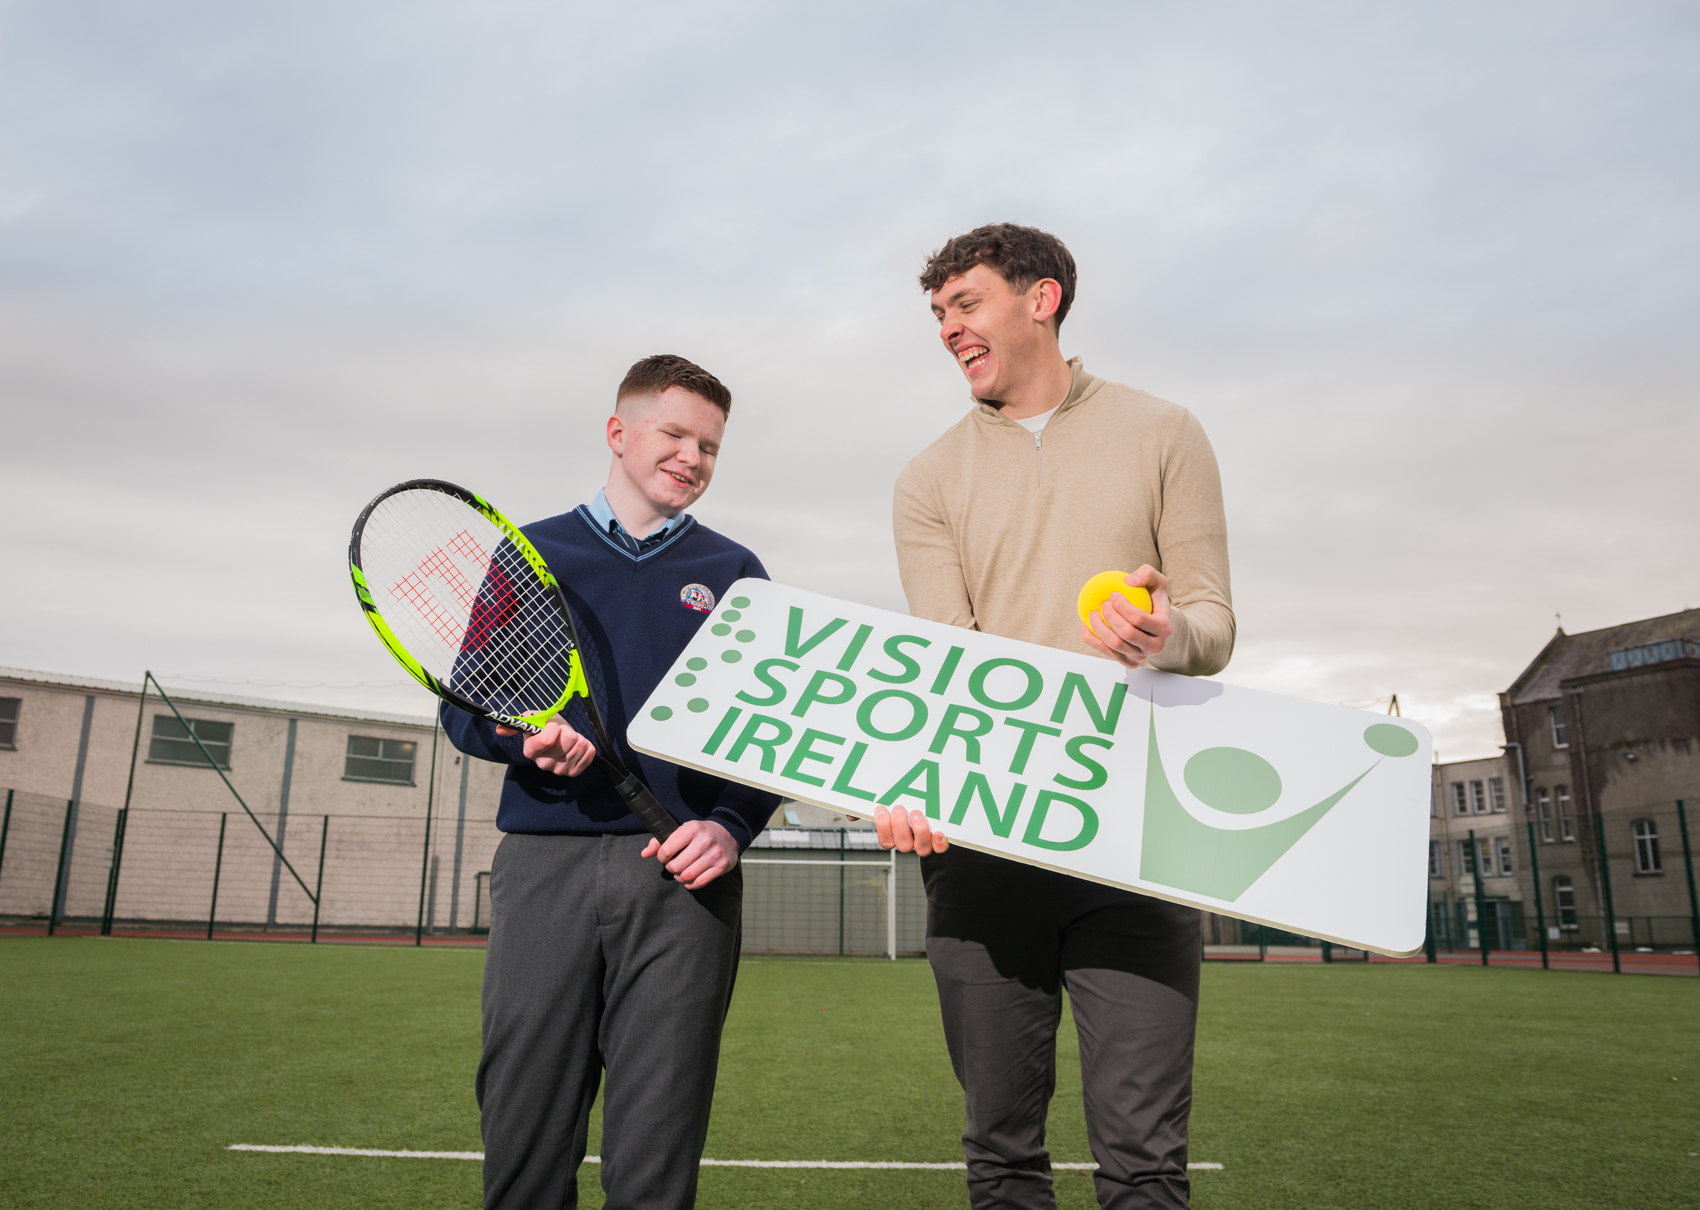 Kerry footballer David Clifford and St Brendan’s College student Michael O Brien share a laugh at the Vision Impaired PE Teaching Guide launch.